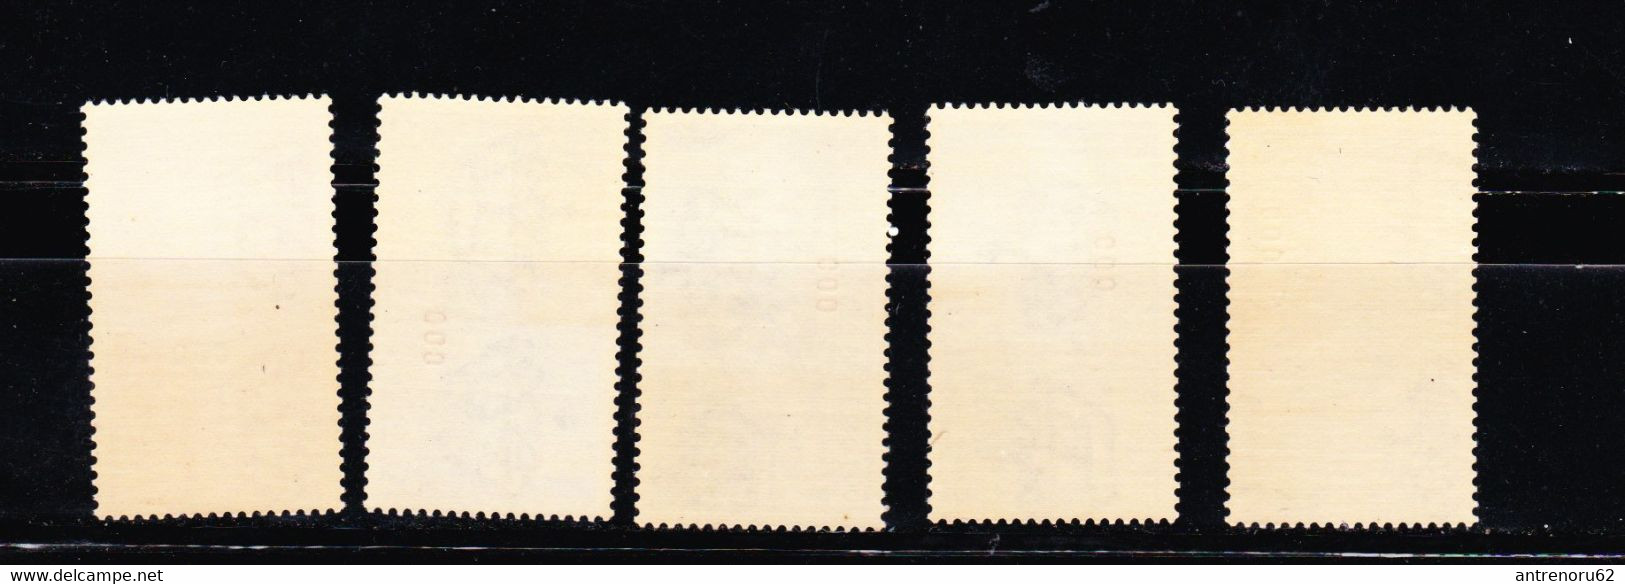 STAMPS-ITALY-COO-1930-UNUSED-MNH**-SEE-SCAN - Egée (Coo)